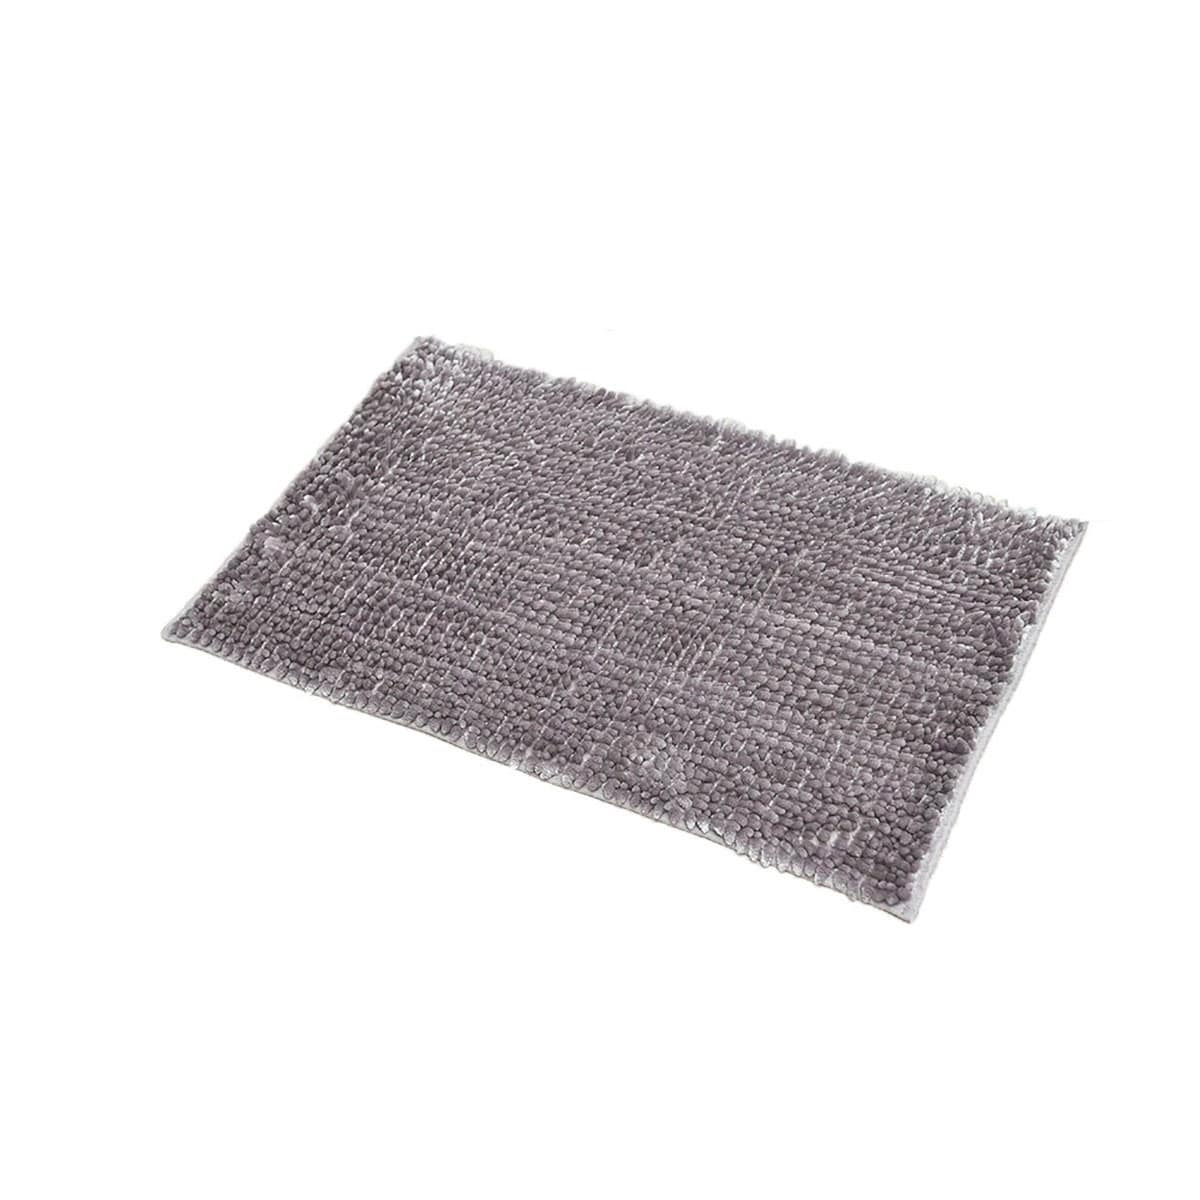 https://ak1.ostkcdn.com/images/products/is/images/direct/ee42308c8f544bde3c5d9578b2bc6576866e2d1e/Bathroom-Rug-Satin-Chenille-Mat-32%22L-x-20%22W.jpg